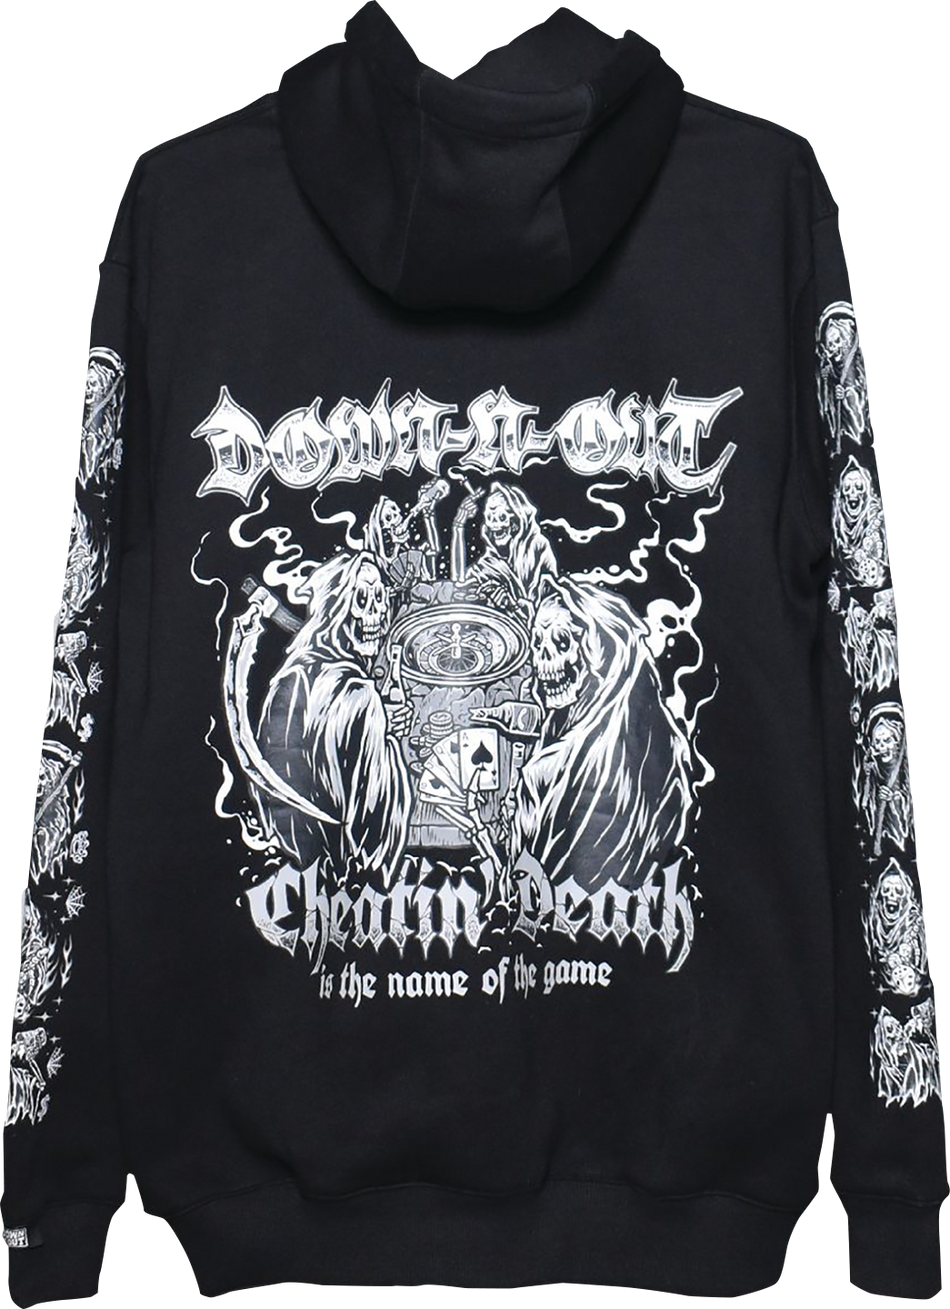 LETHAL THREAT Down-N-Out Cheating Death Hoodie - Black - XL DT10054XL